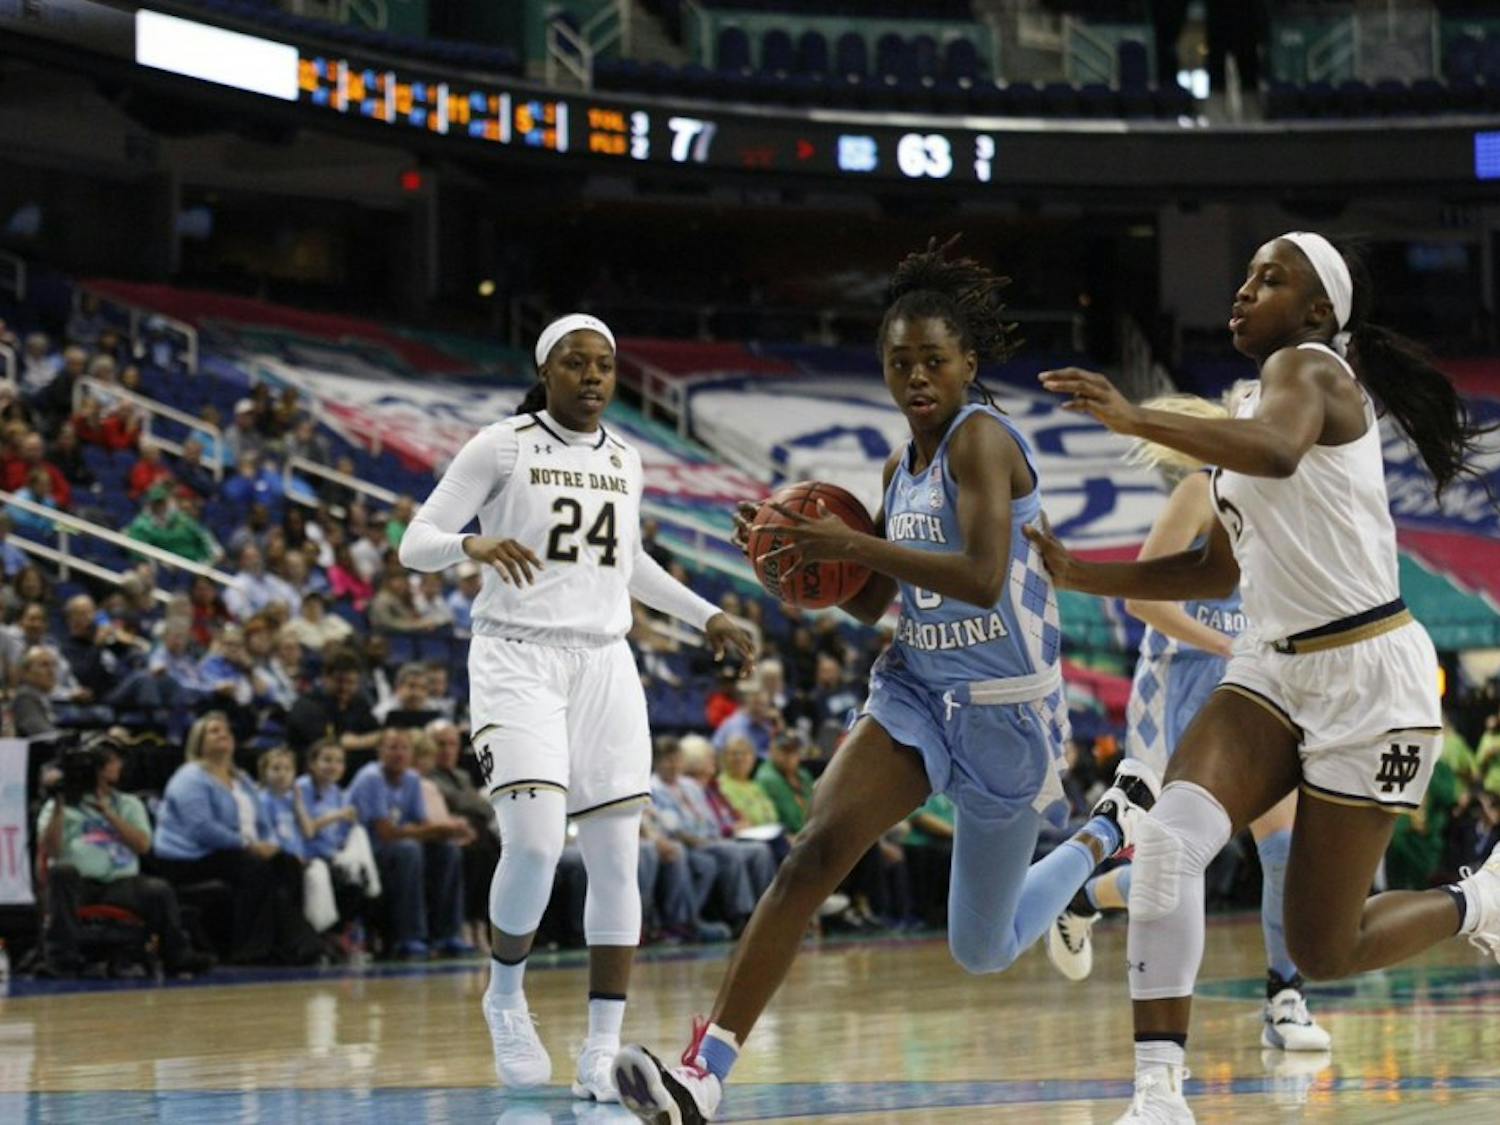 North Carolina junior guard Shayla Bennett drives past Notre Dame's Jackie Young in an ACC Tournament second-round matchup on March 8, 2019.